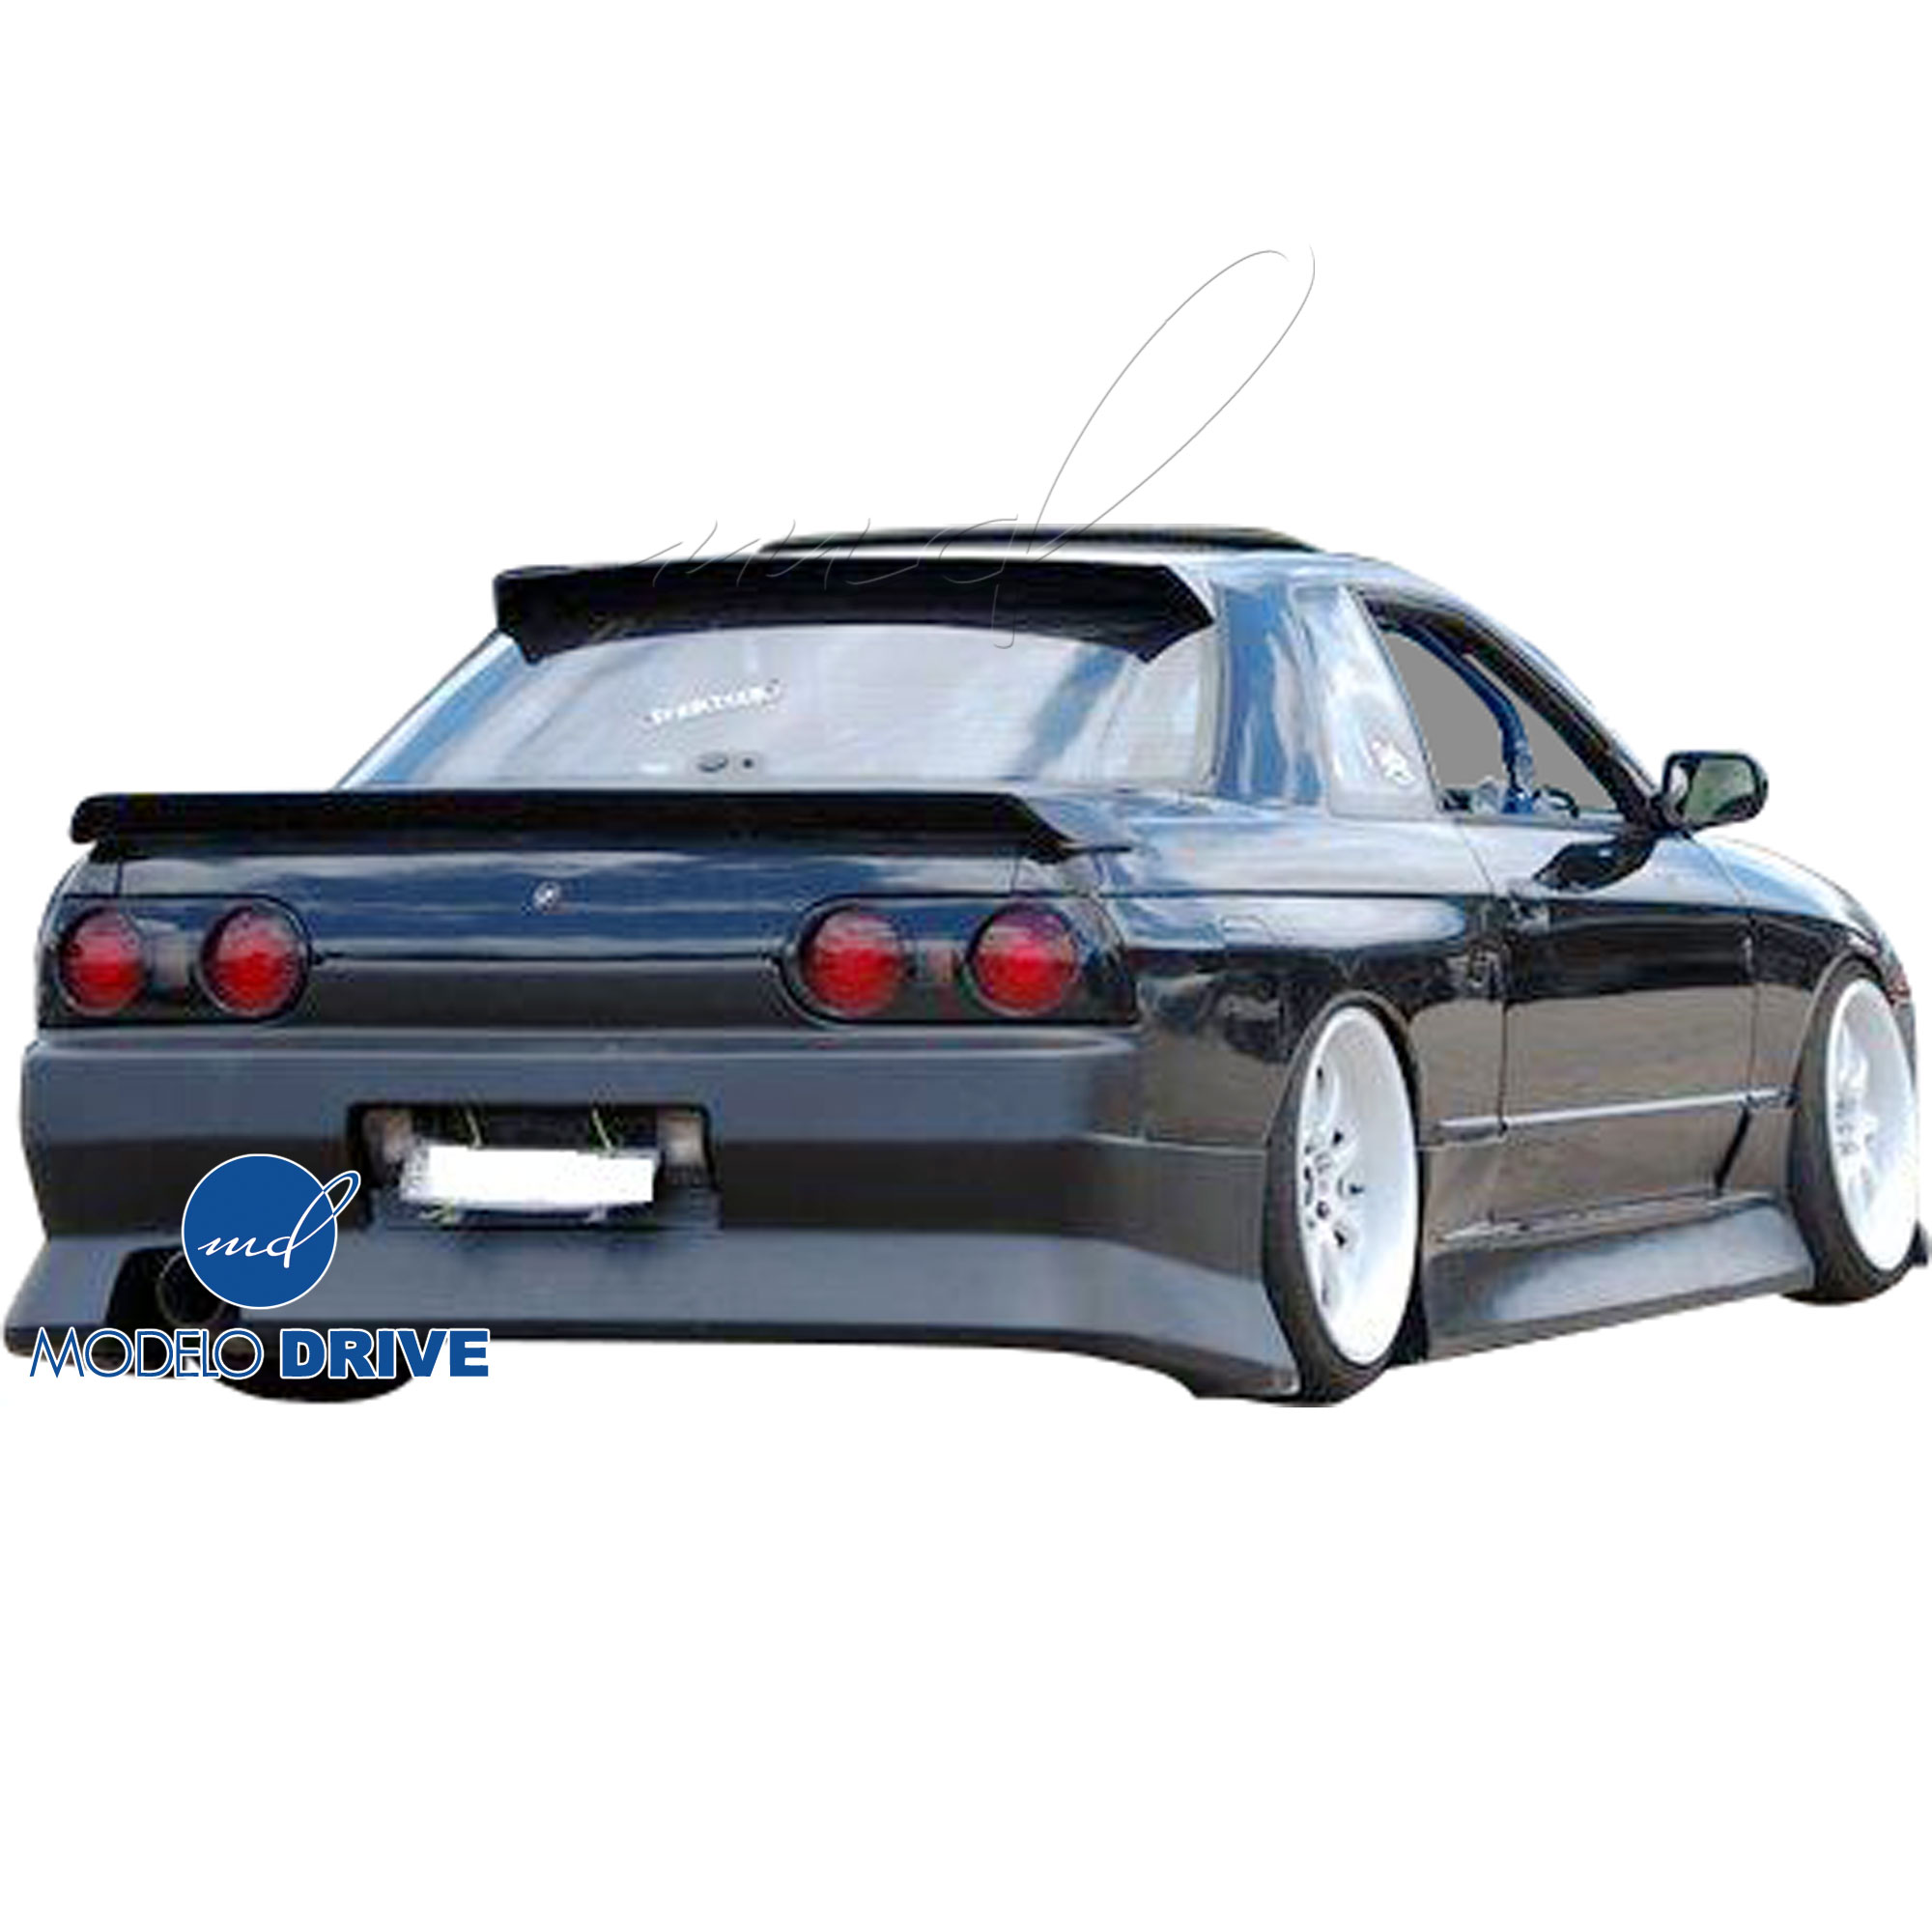 ModeloDrive FRP DMA Trunk Spoiler Wing > Nissan Skyline R32 1990-1994 > 2dr Coupe - Image 24